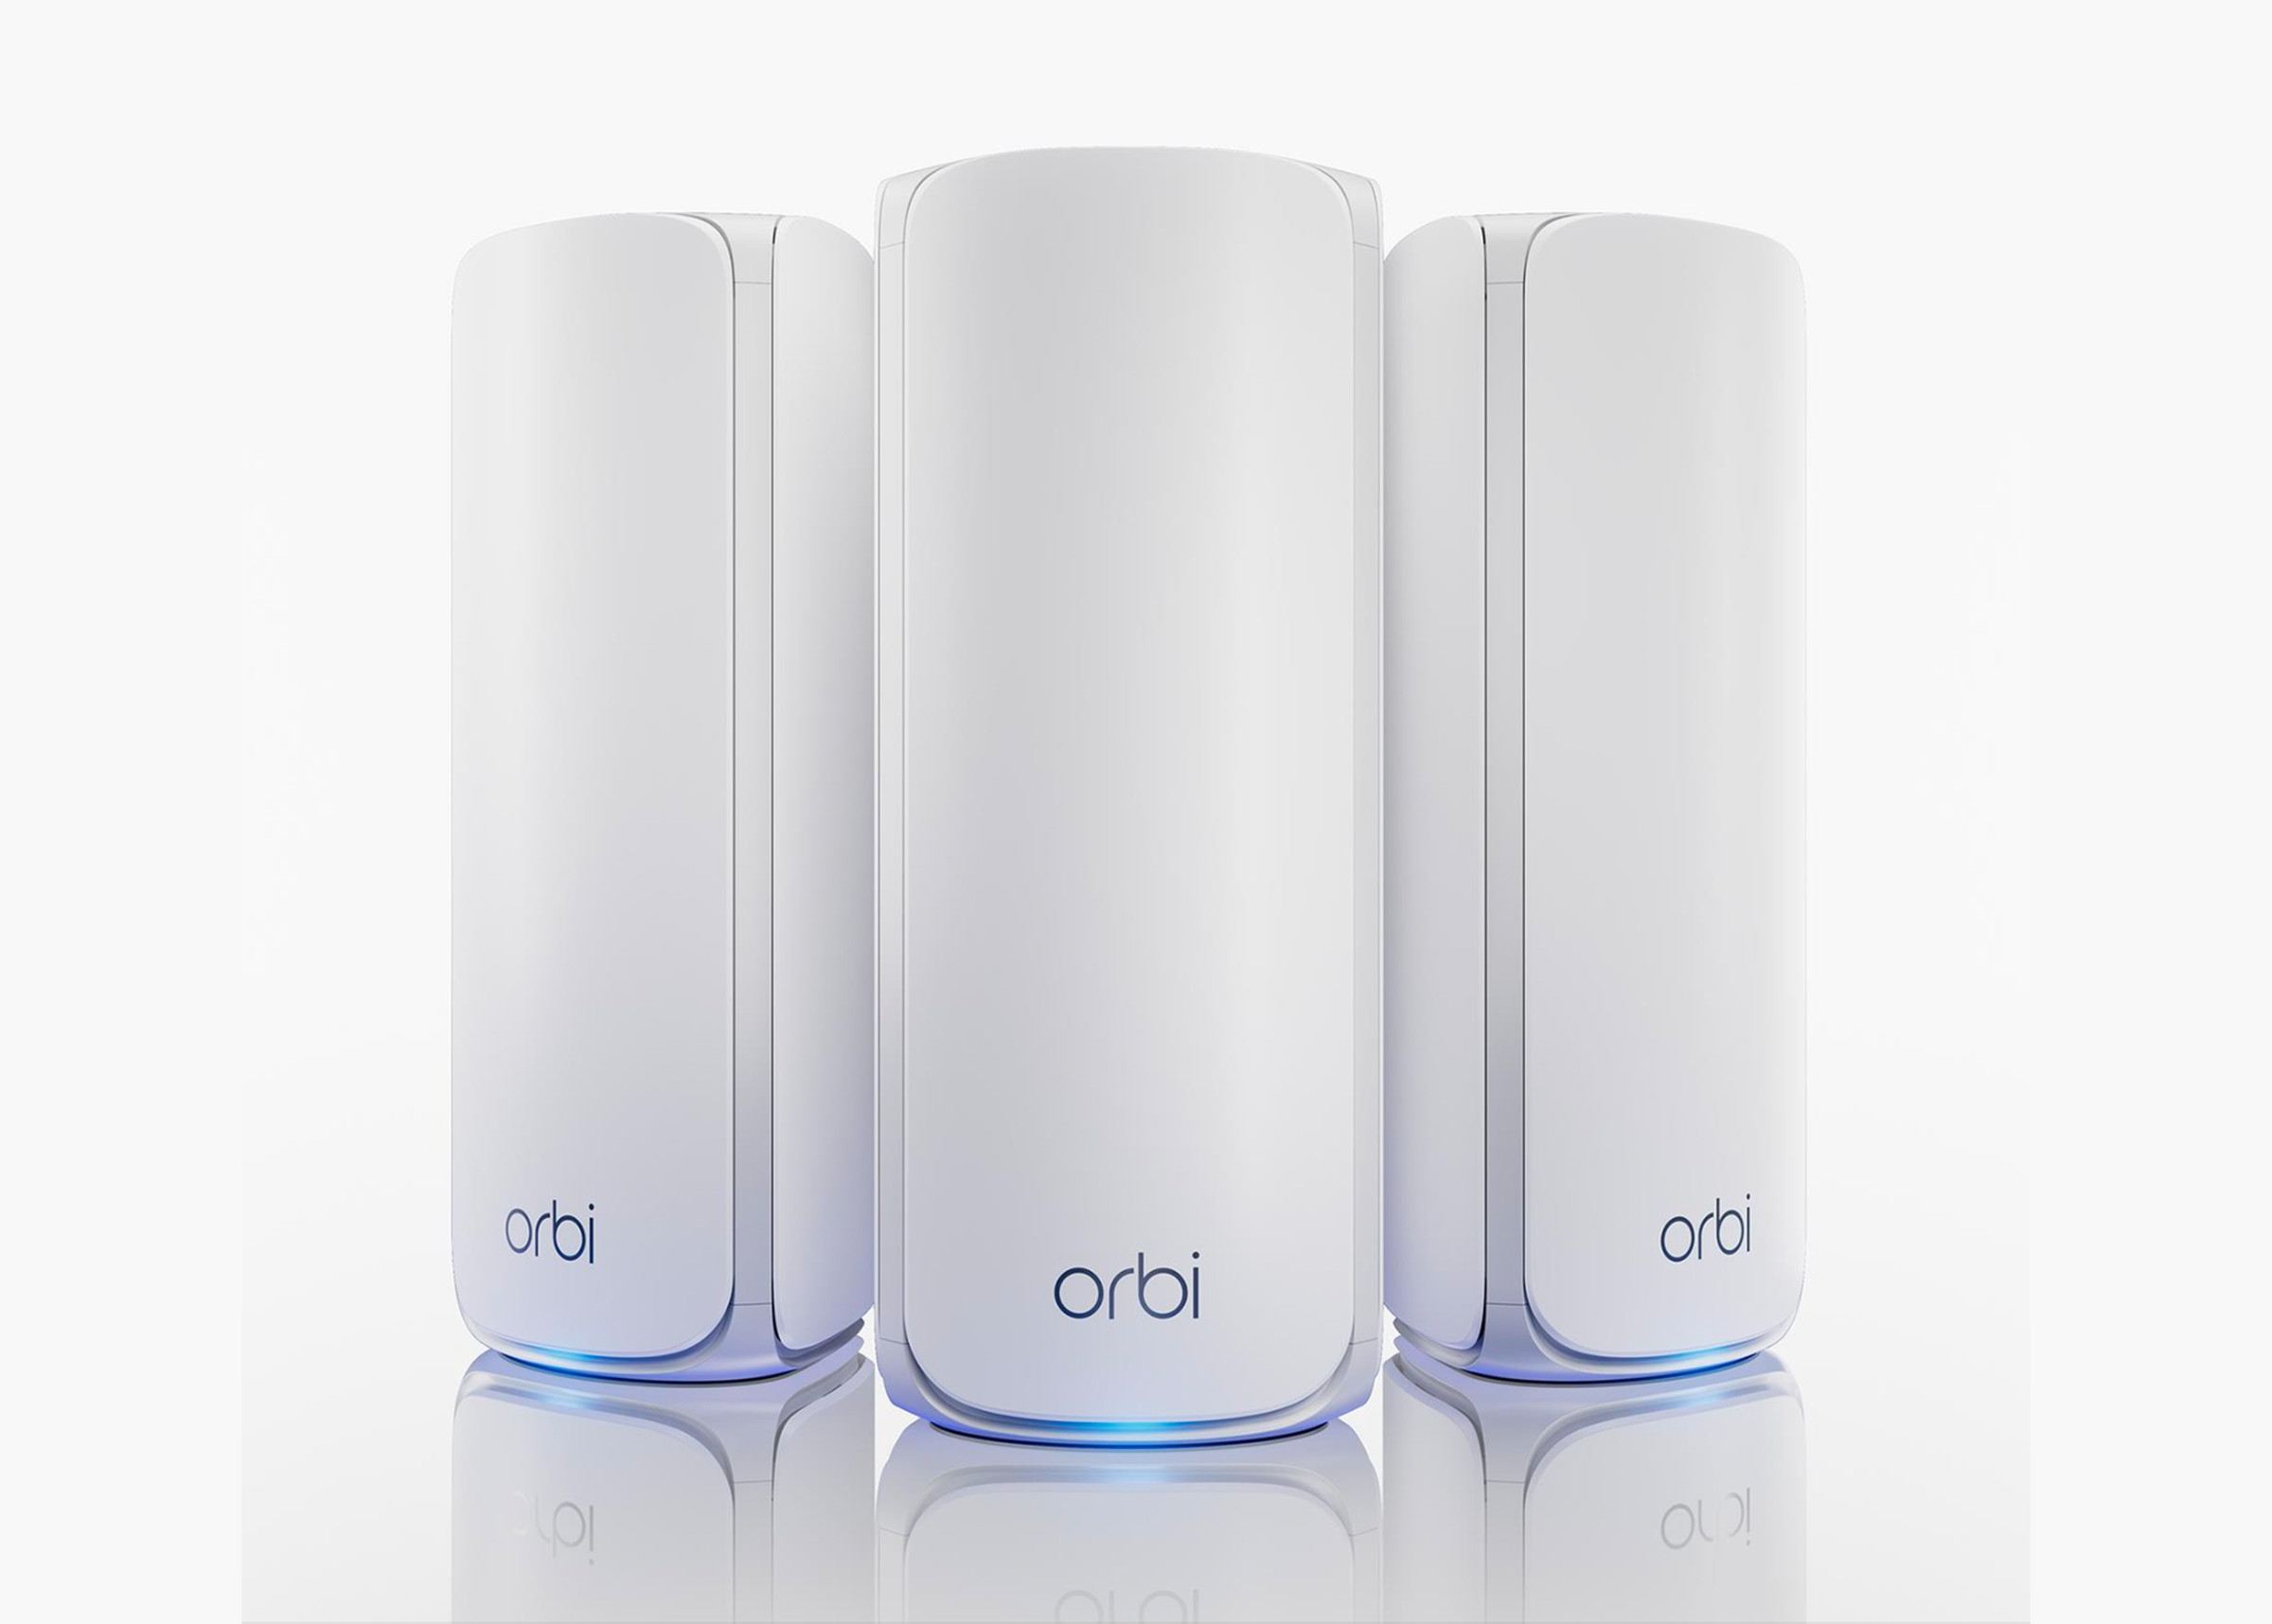 Netgear’s new Orbi mesh and Nighthawk routers are a cheaper way into Wi-Fi 7